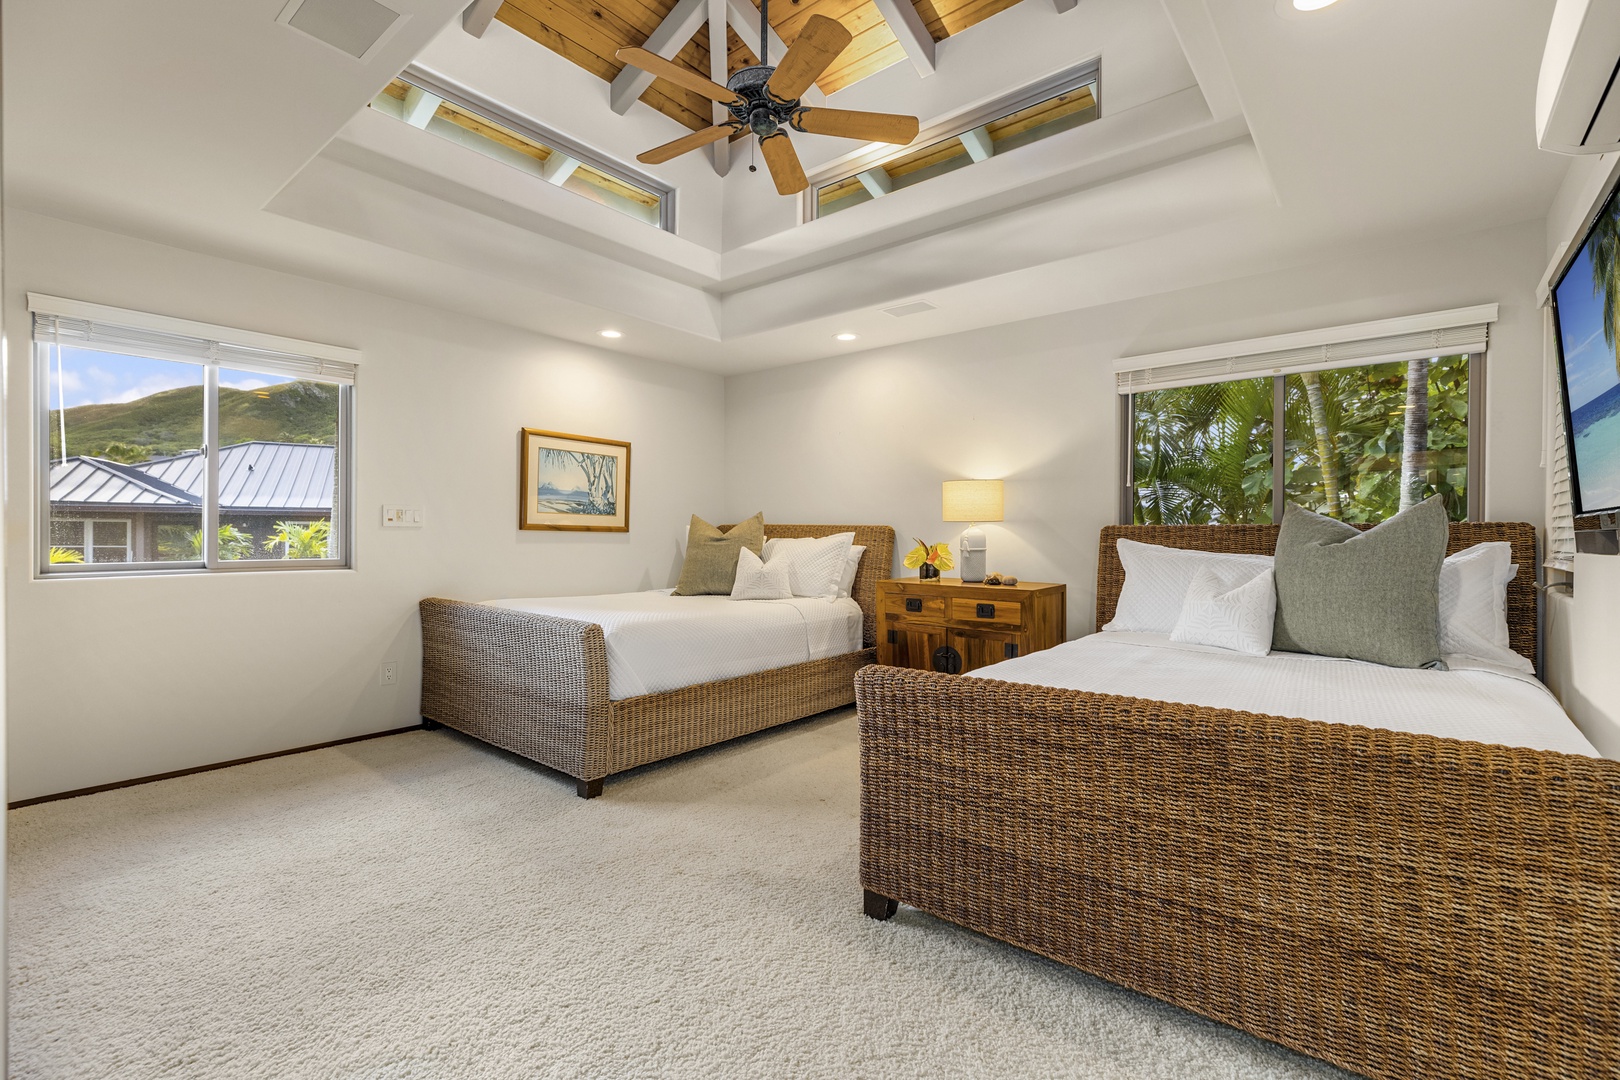 Kailua Vacation Rentals, Mokulua Sunrise - Guest Bedroom 2 is furnished with 2 full beds, with mountain views and an ensuite bath